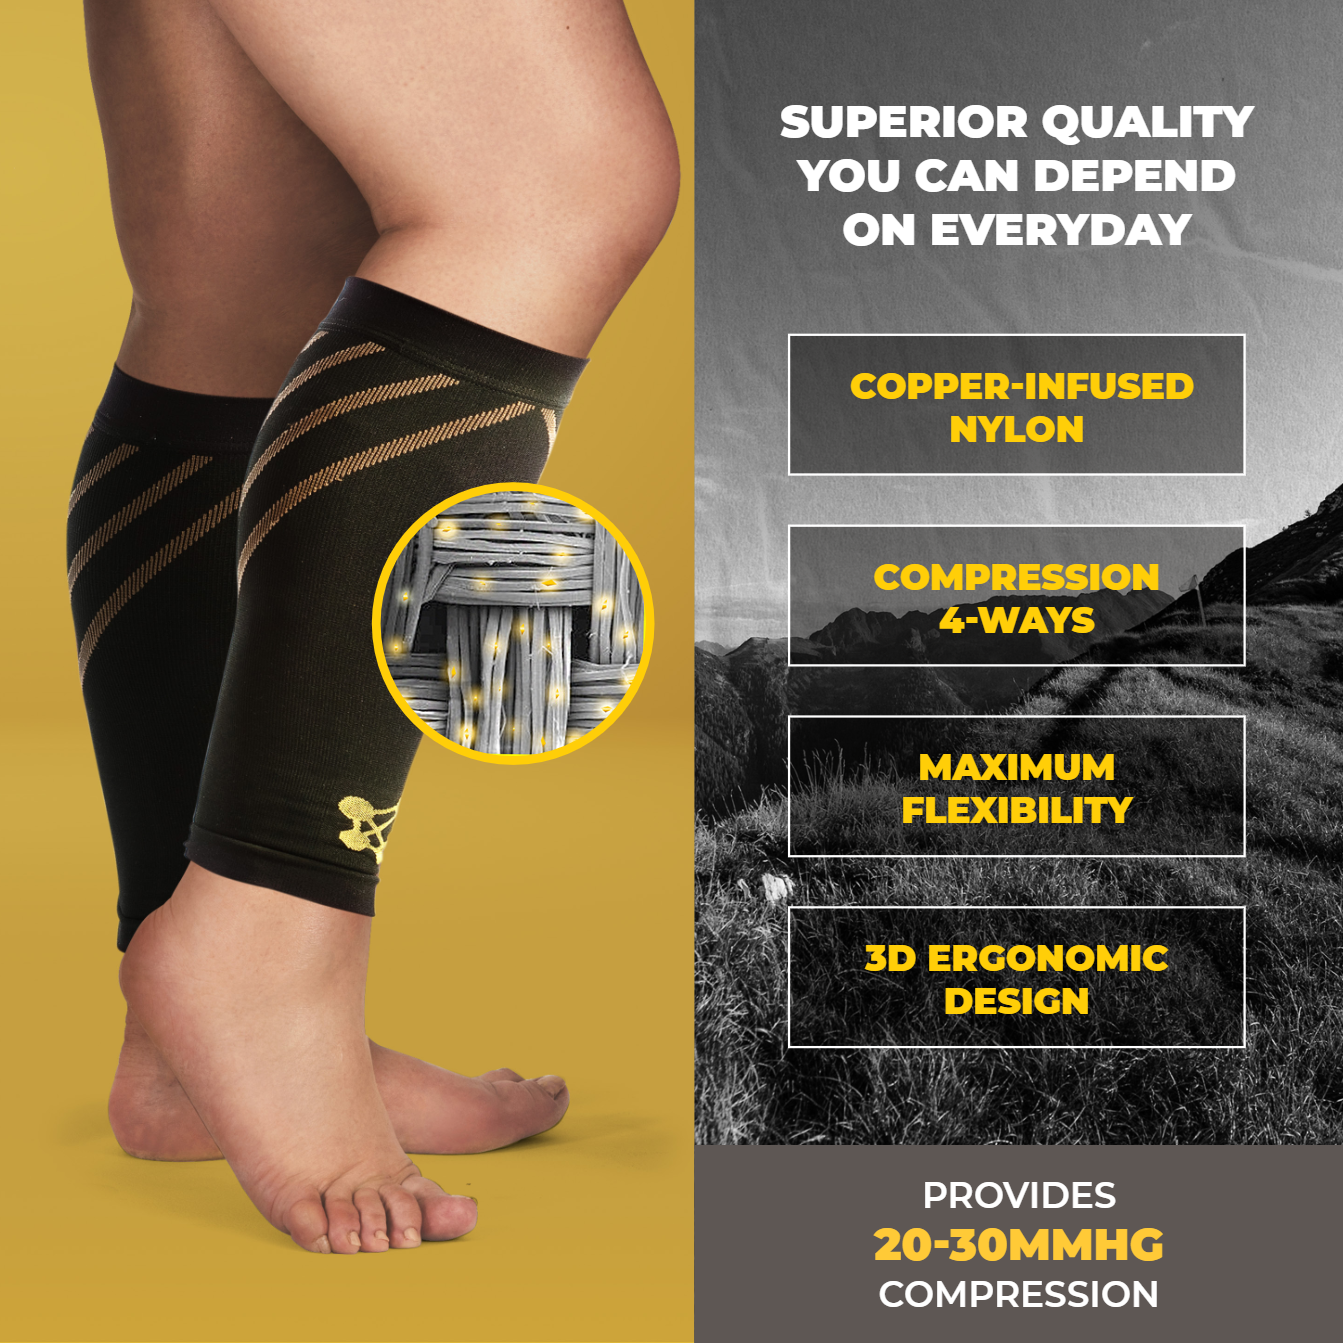 New Compression Leg Men Wide Calf Received Well by Amazon Customers